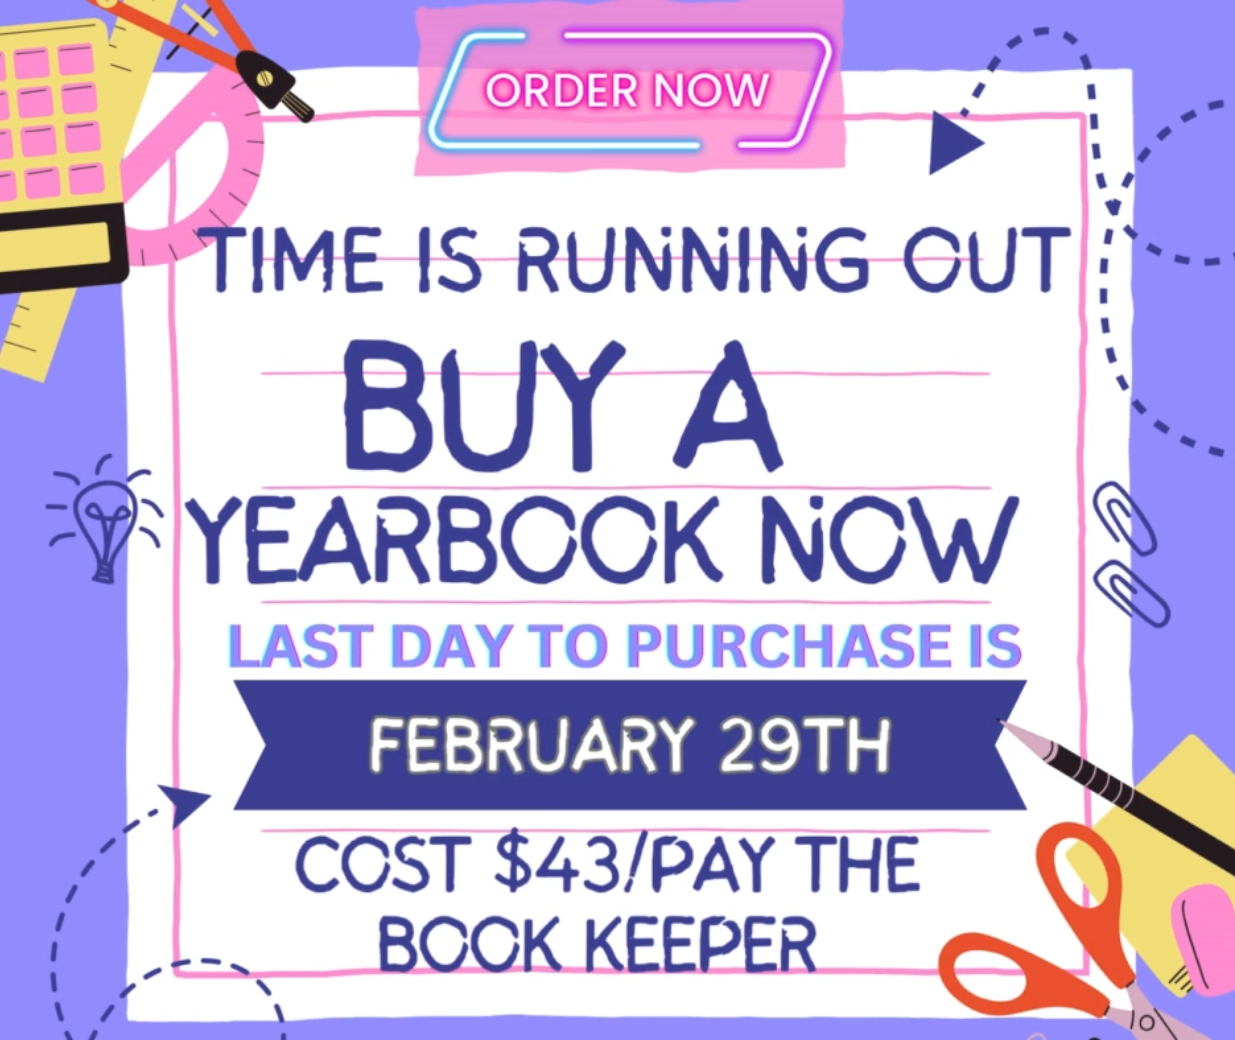 Buy a year book now, Time is running out, Last day to purchase is February 29th Cost 43 dollars pay the Book Keeper